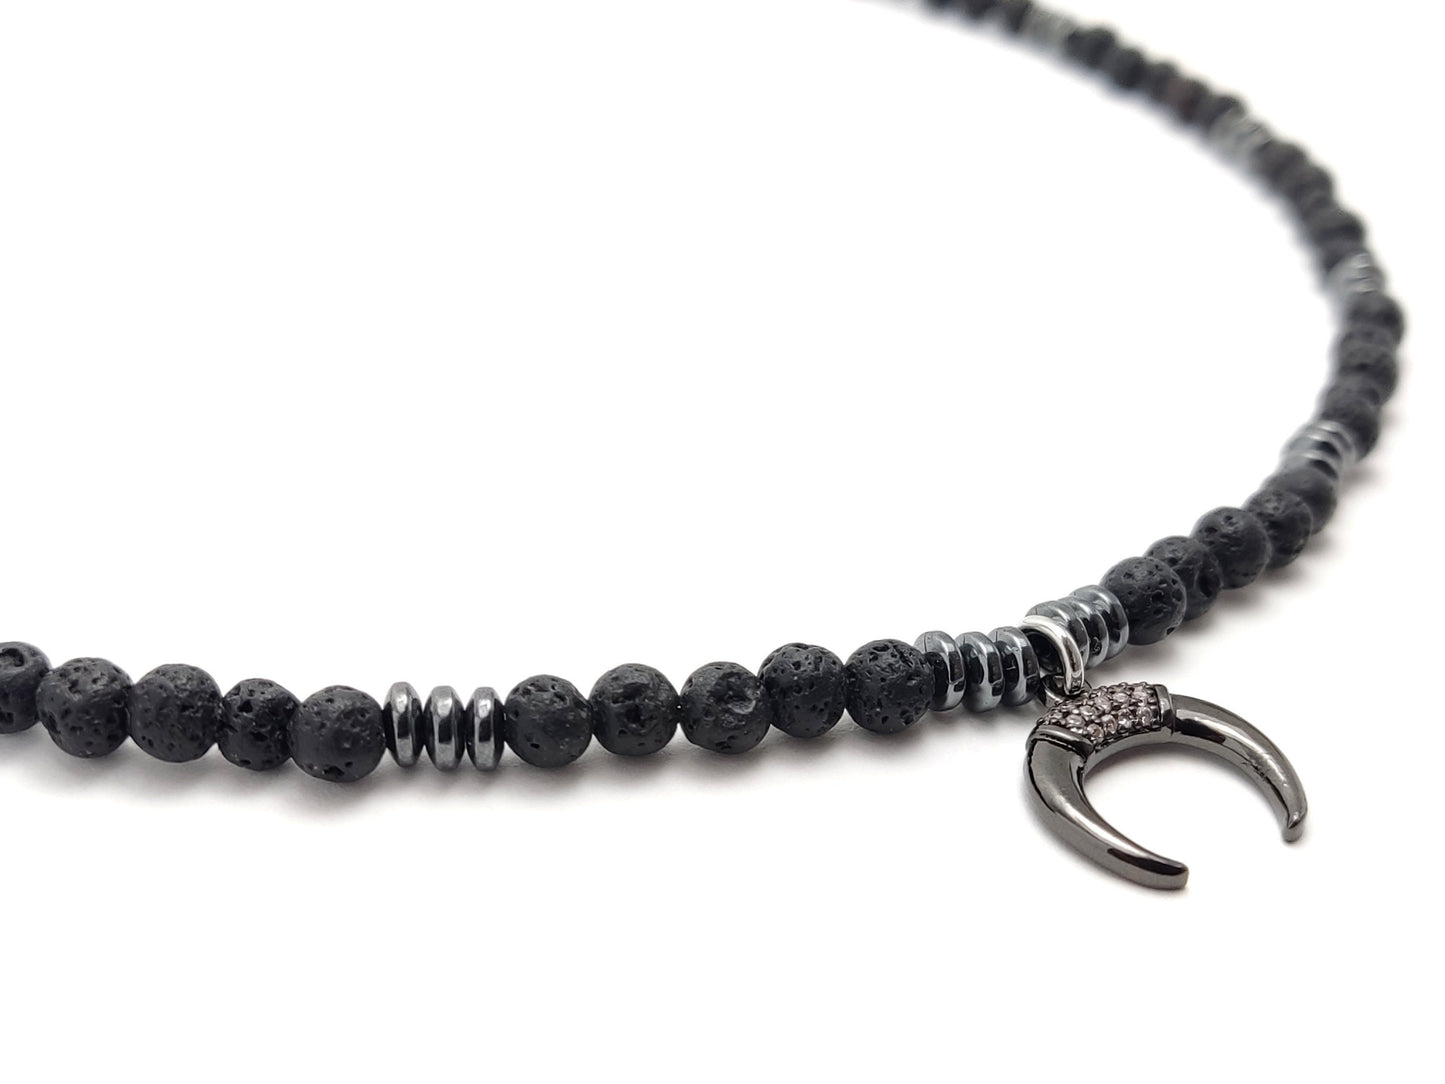 Volcanic Lava Greek Necklace Horns Pendant, Mens Womens Unisex Jewelry From Greece, Trendy Fashion Black Stones Good Luck Necklaces, Lava